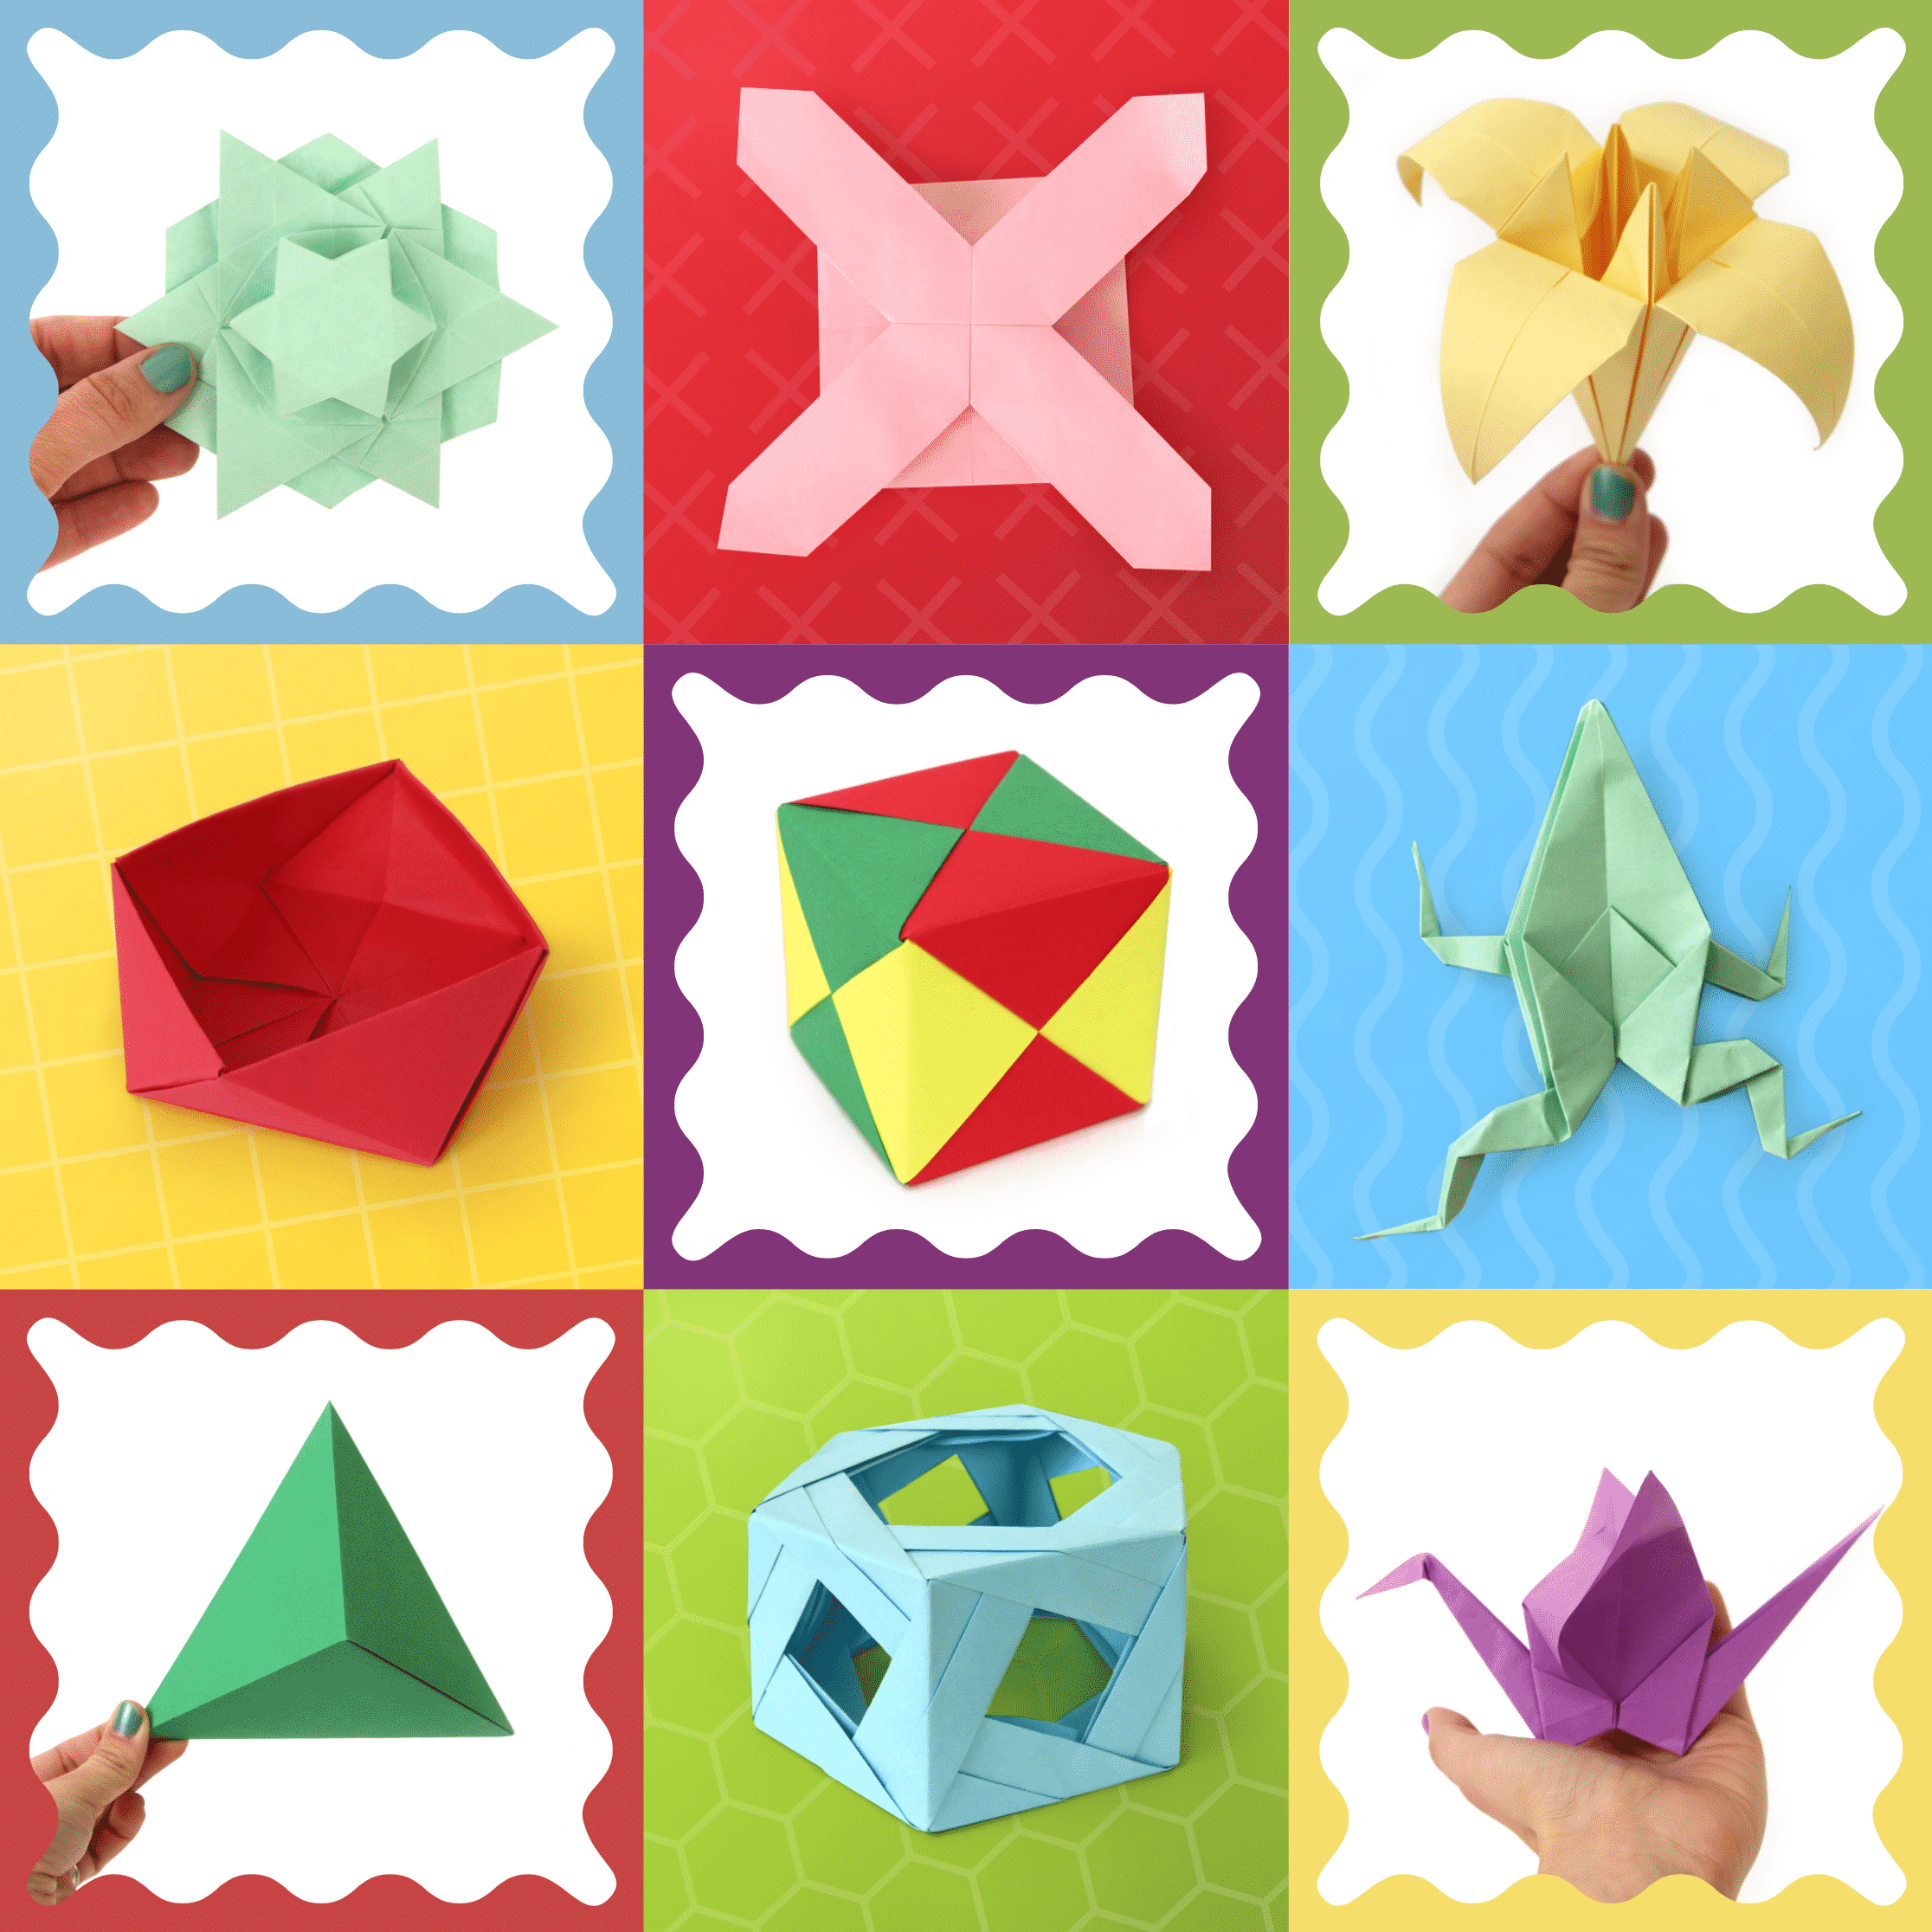 Origami Day Fun Facts - PrintWorks | Paris Corporation